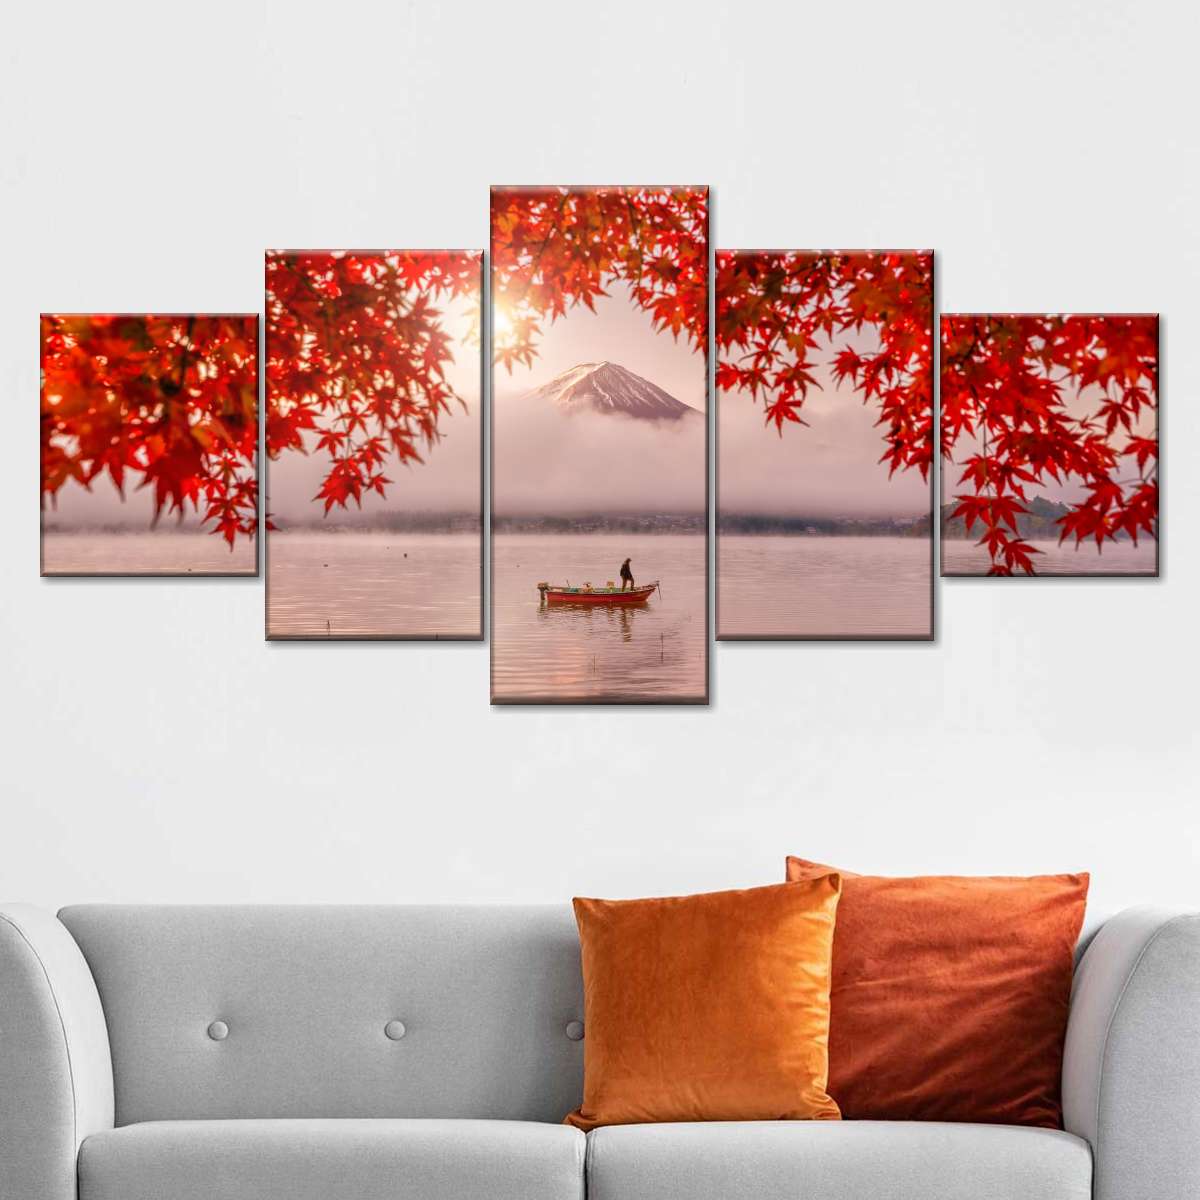 Red Autumn Leaves In Fuji Multi wall art padstyle